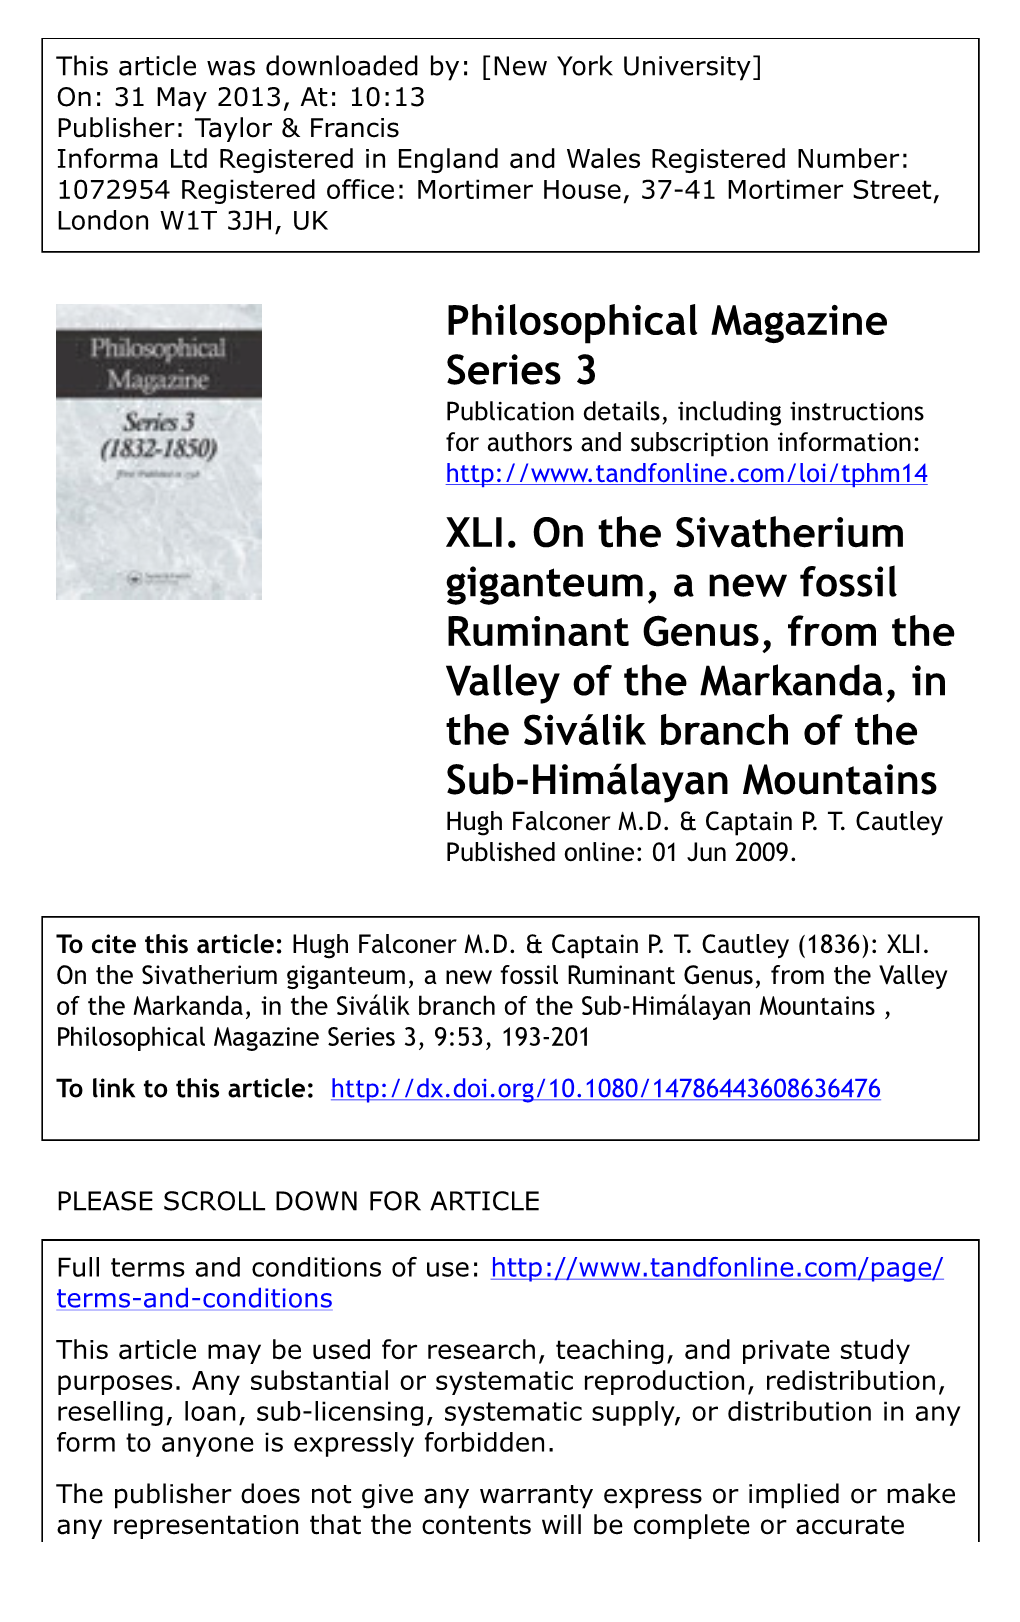 XLI. on the Sivatherium Giganteum, a New Fossil Ruminant Genus, From